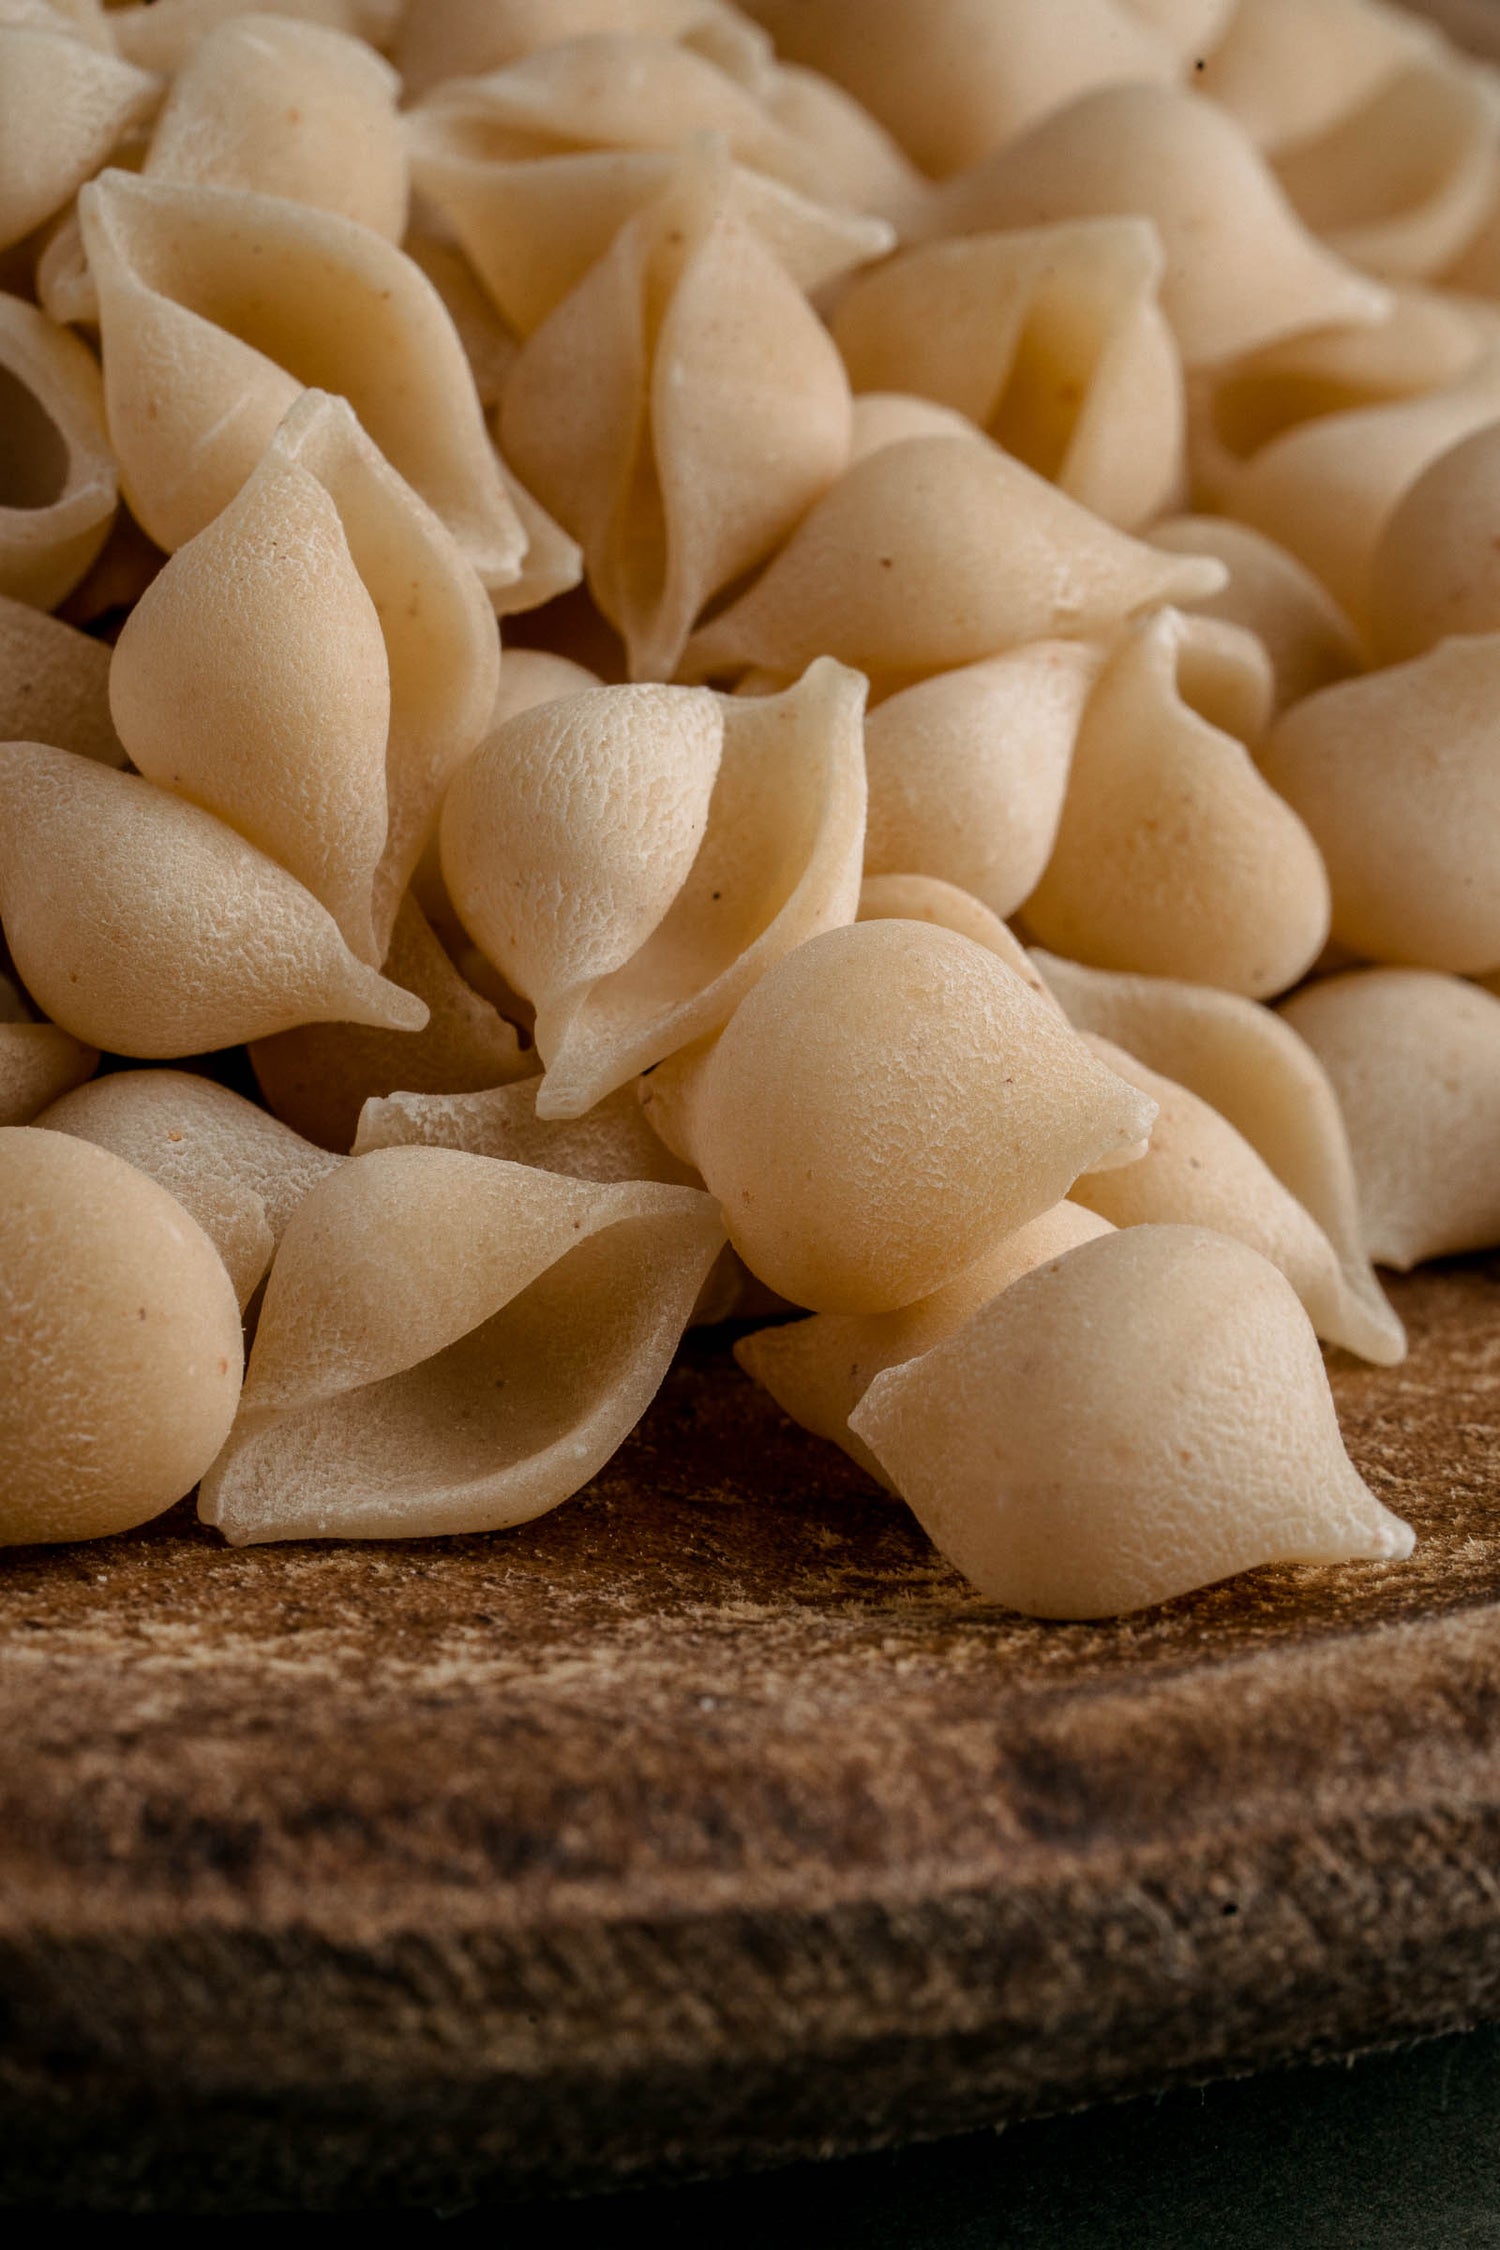 Northern Pasta Co Conchigliette is crafted using traditional Italian methods.